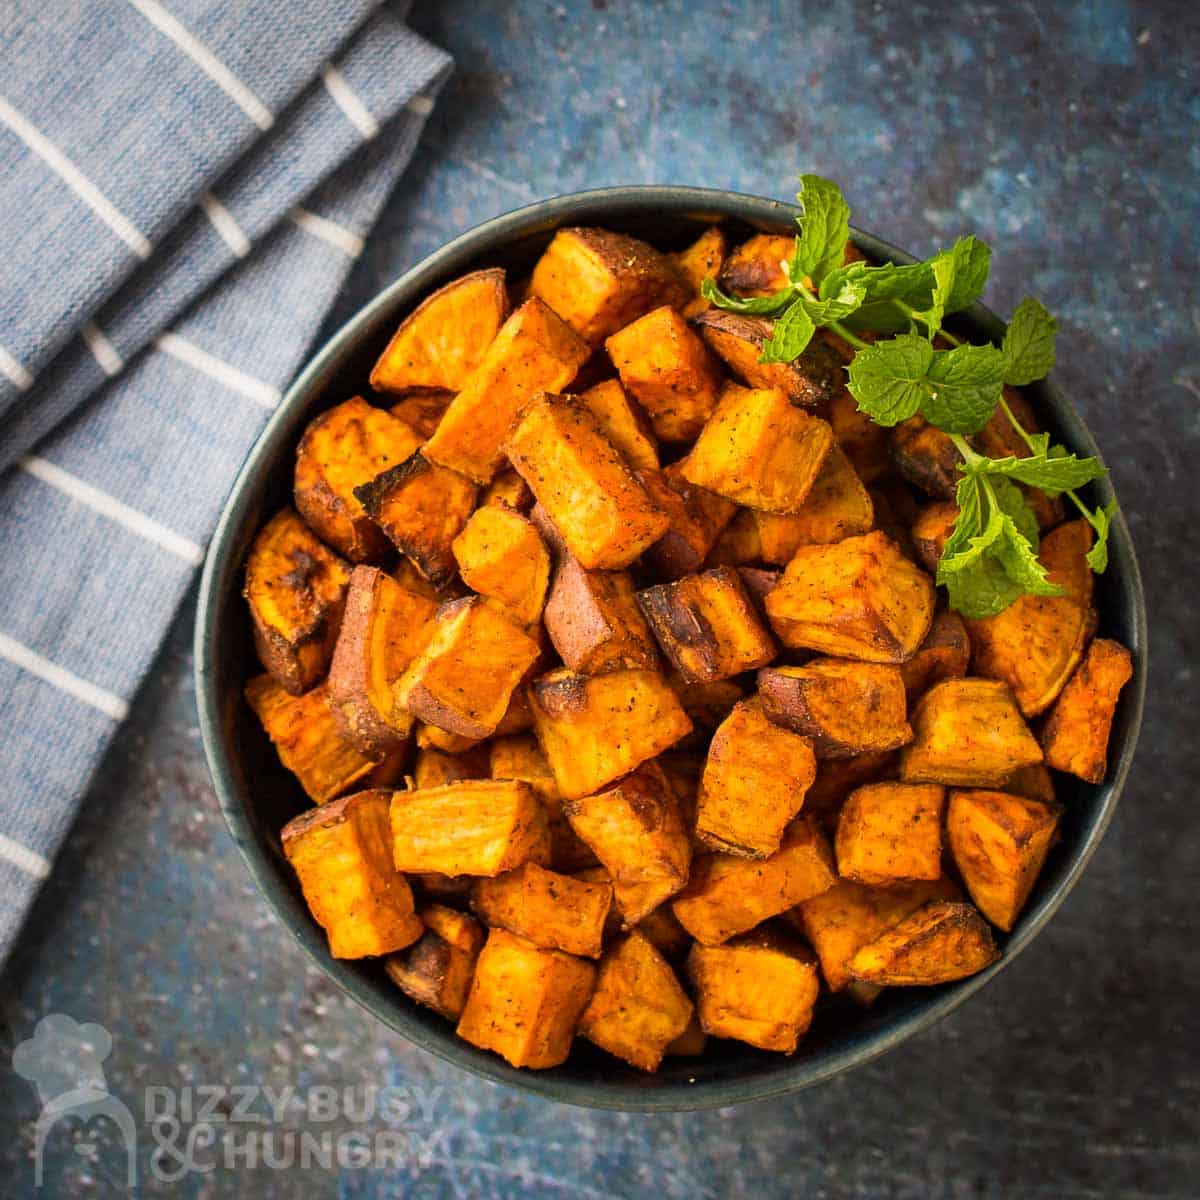 Overhead shot of sweet potato cubes in a black bowl garnished with basil on a blue and grey marble surface with a blue striped towel on the side.